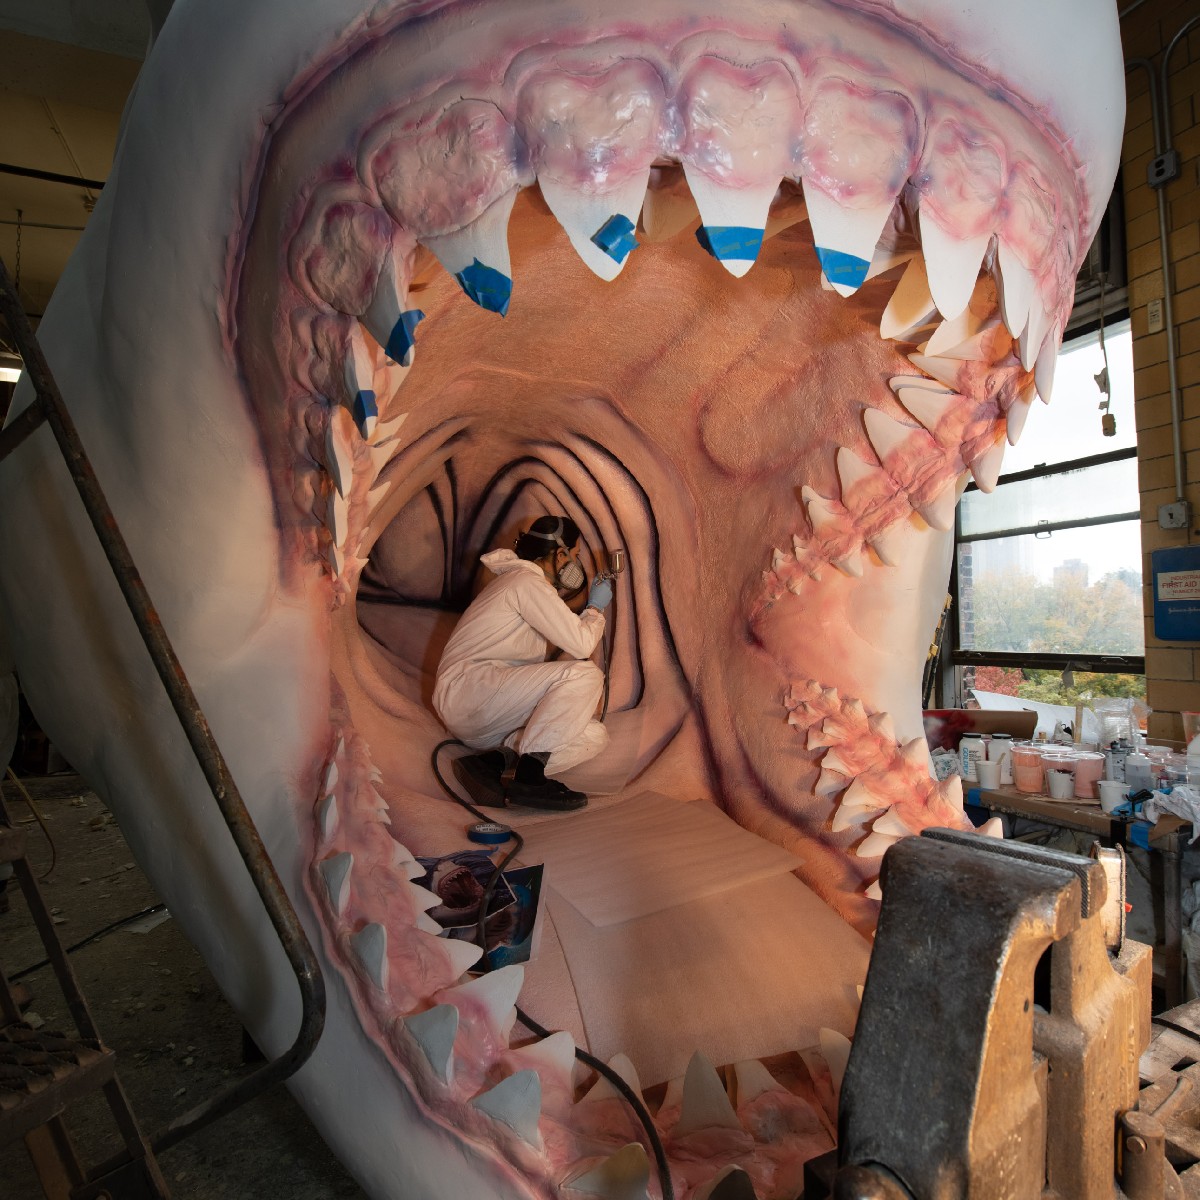 🦈 It’s #SharkAwarenessDay! For the Museum’s special exhibition Sharks, a team of artists used scientific data to reconstruct the mighty megalodon. Scans of real fossilized teeth were 3D printed to arm it with 138 sharp chompers, the largest of which are 7 in (17.8 cm) long.